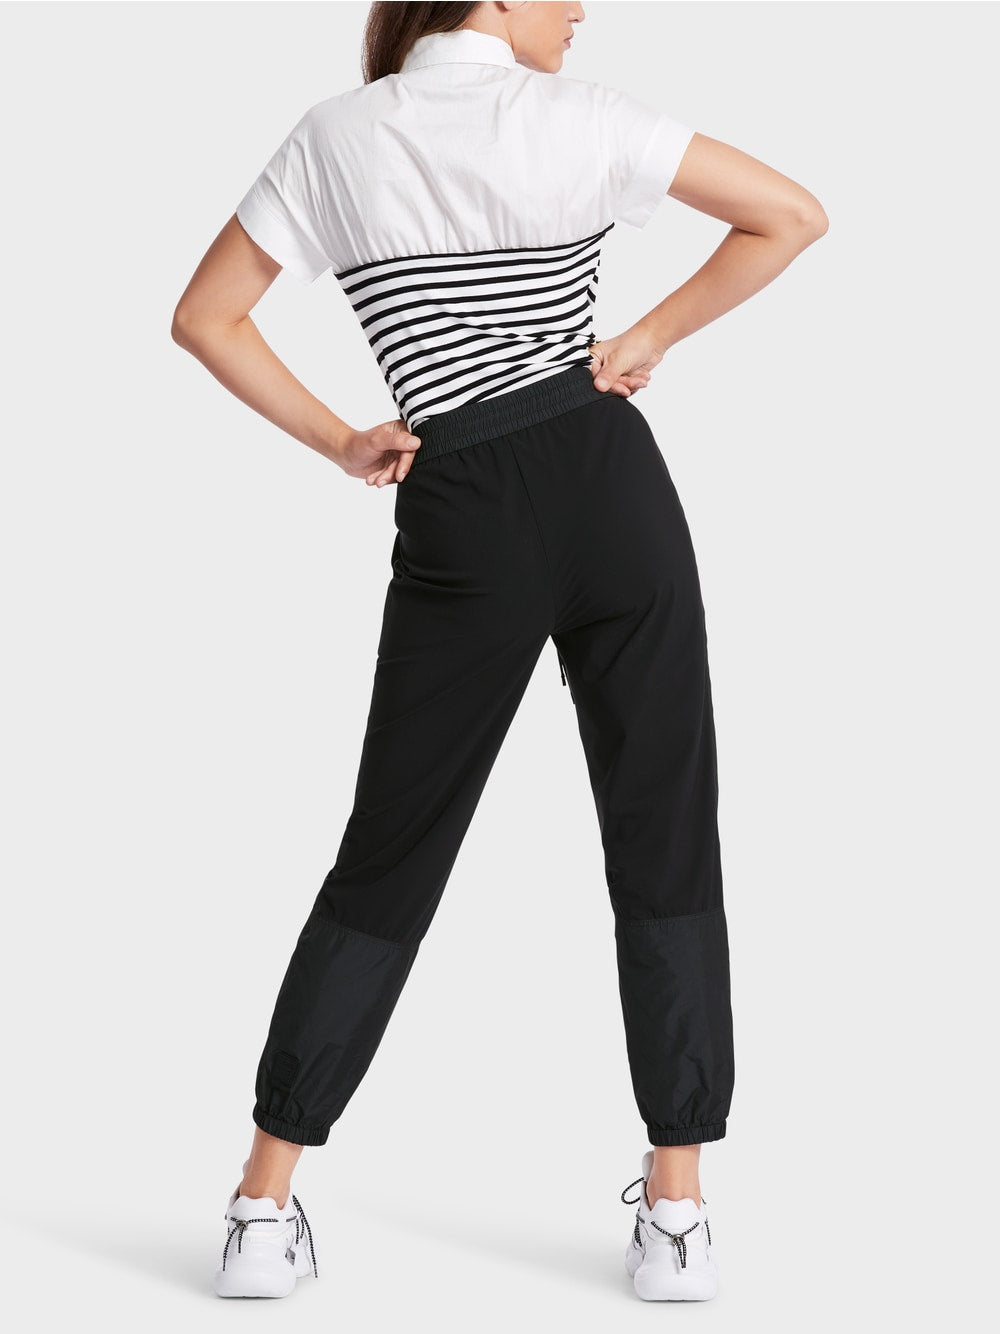 Marc Cain Black ROYE pants in material mix